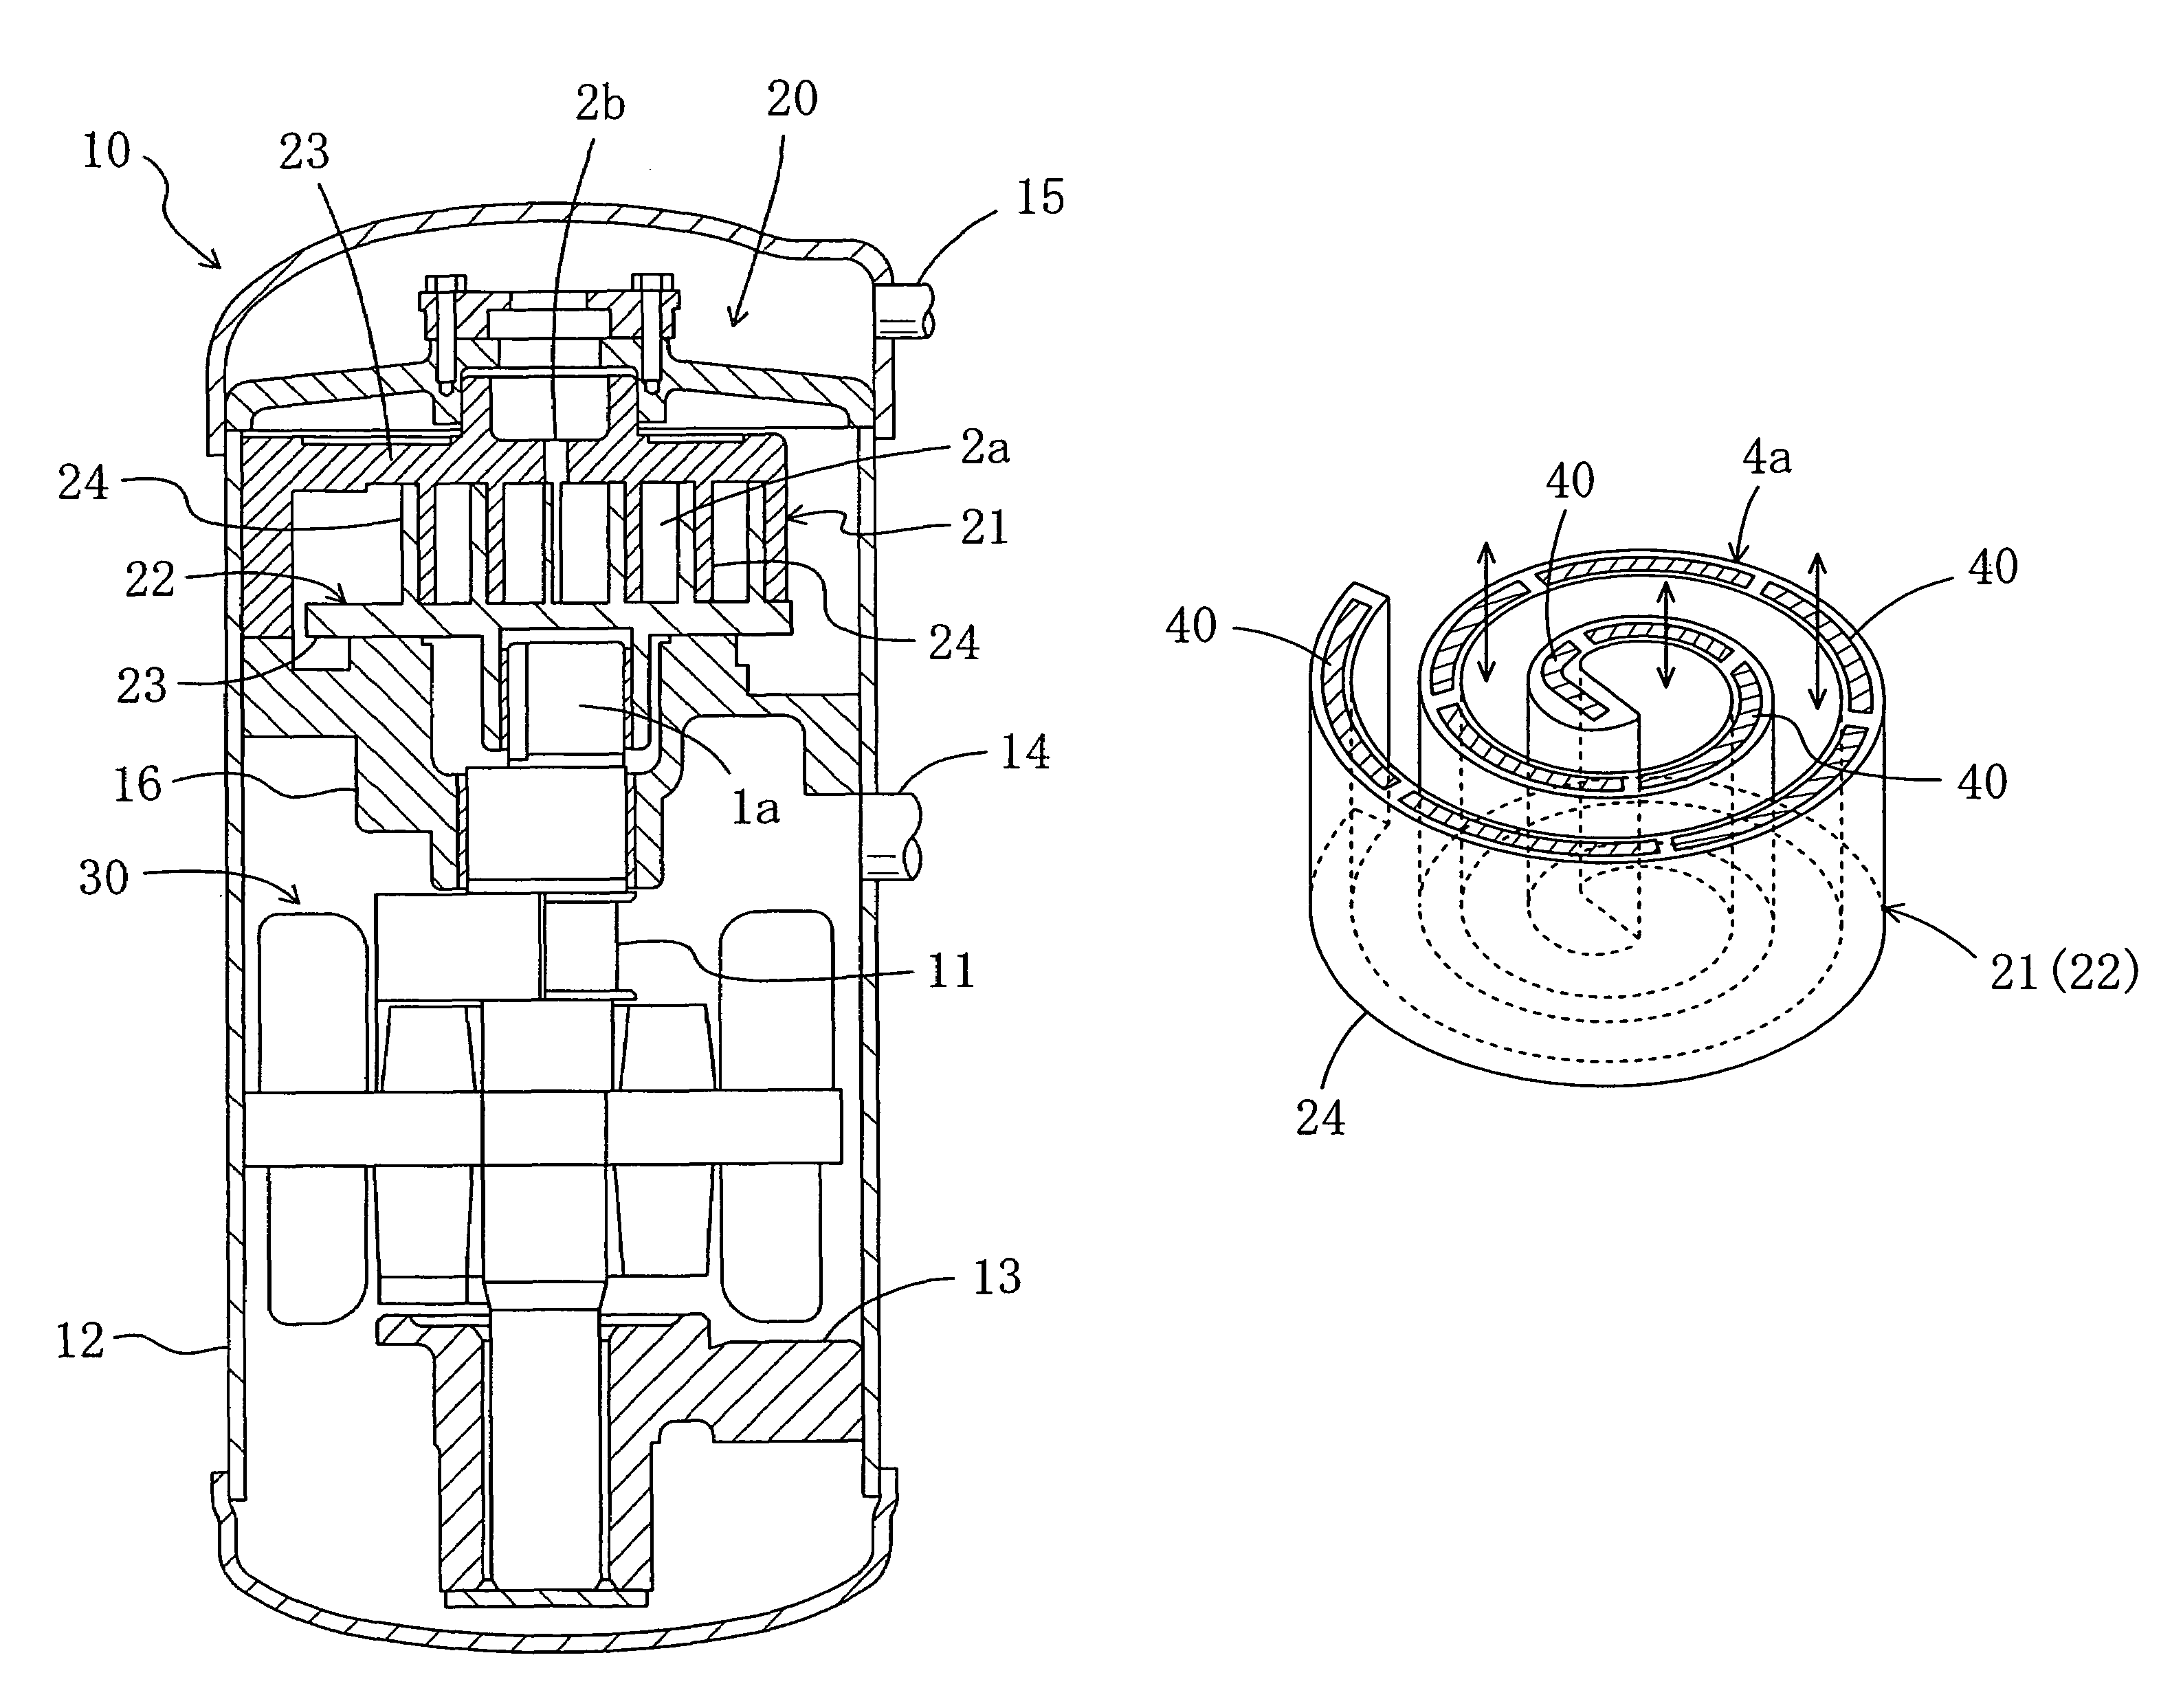 Scroll fluid machine having an adjustment member with a deformable element